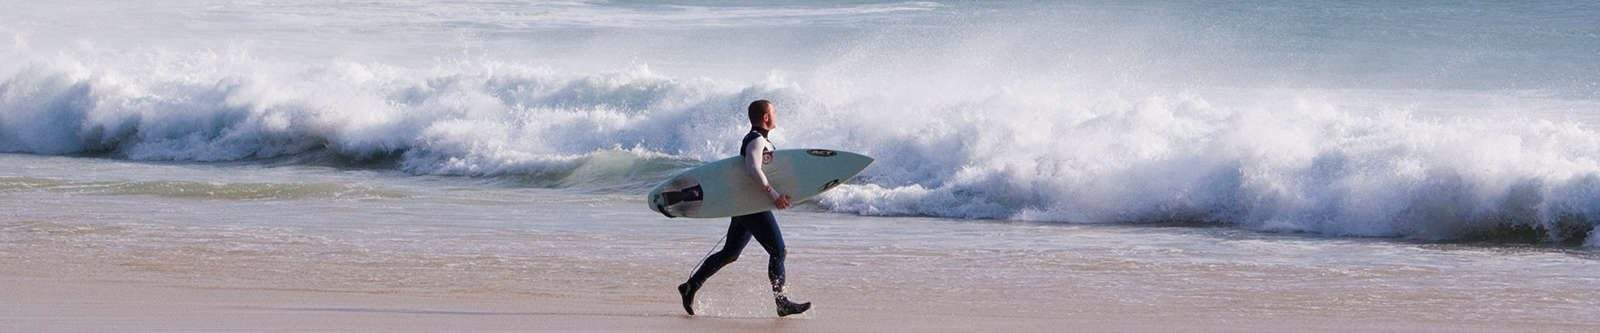 man with surfboard